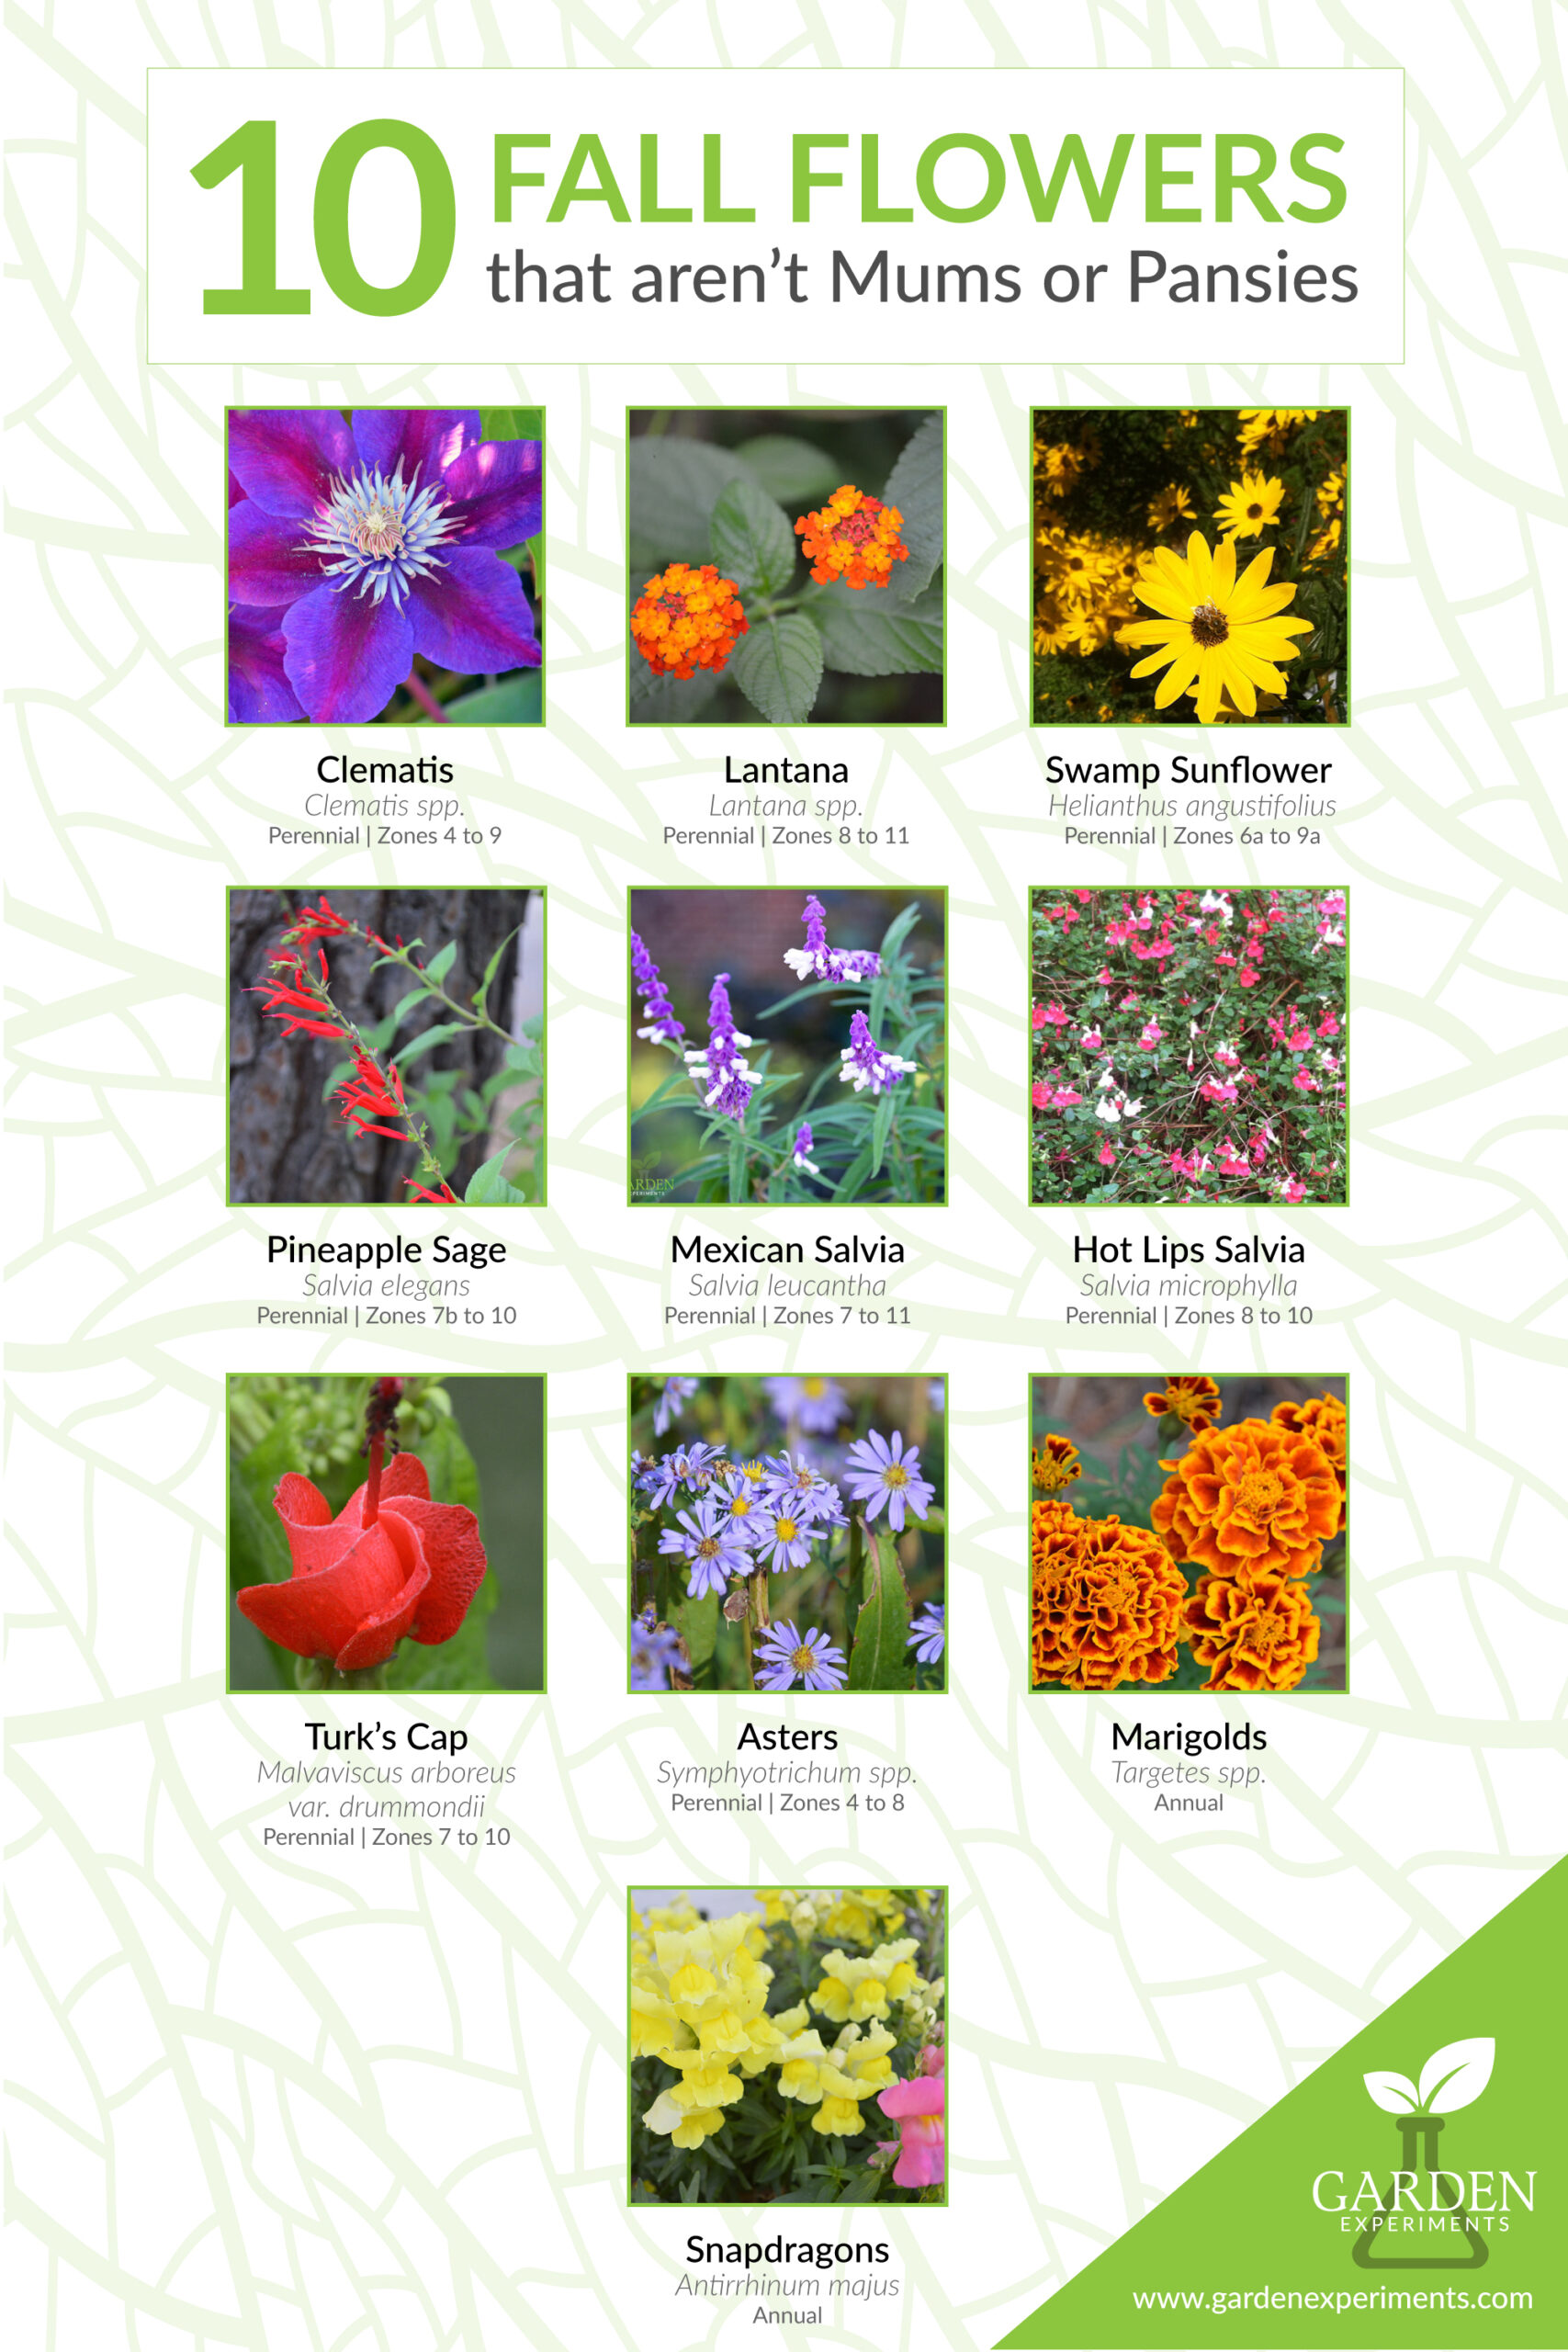 10 Fall Flowers that aren't mums or pansies infographic